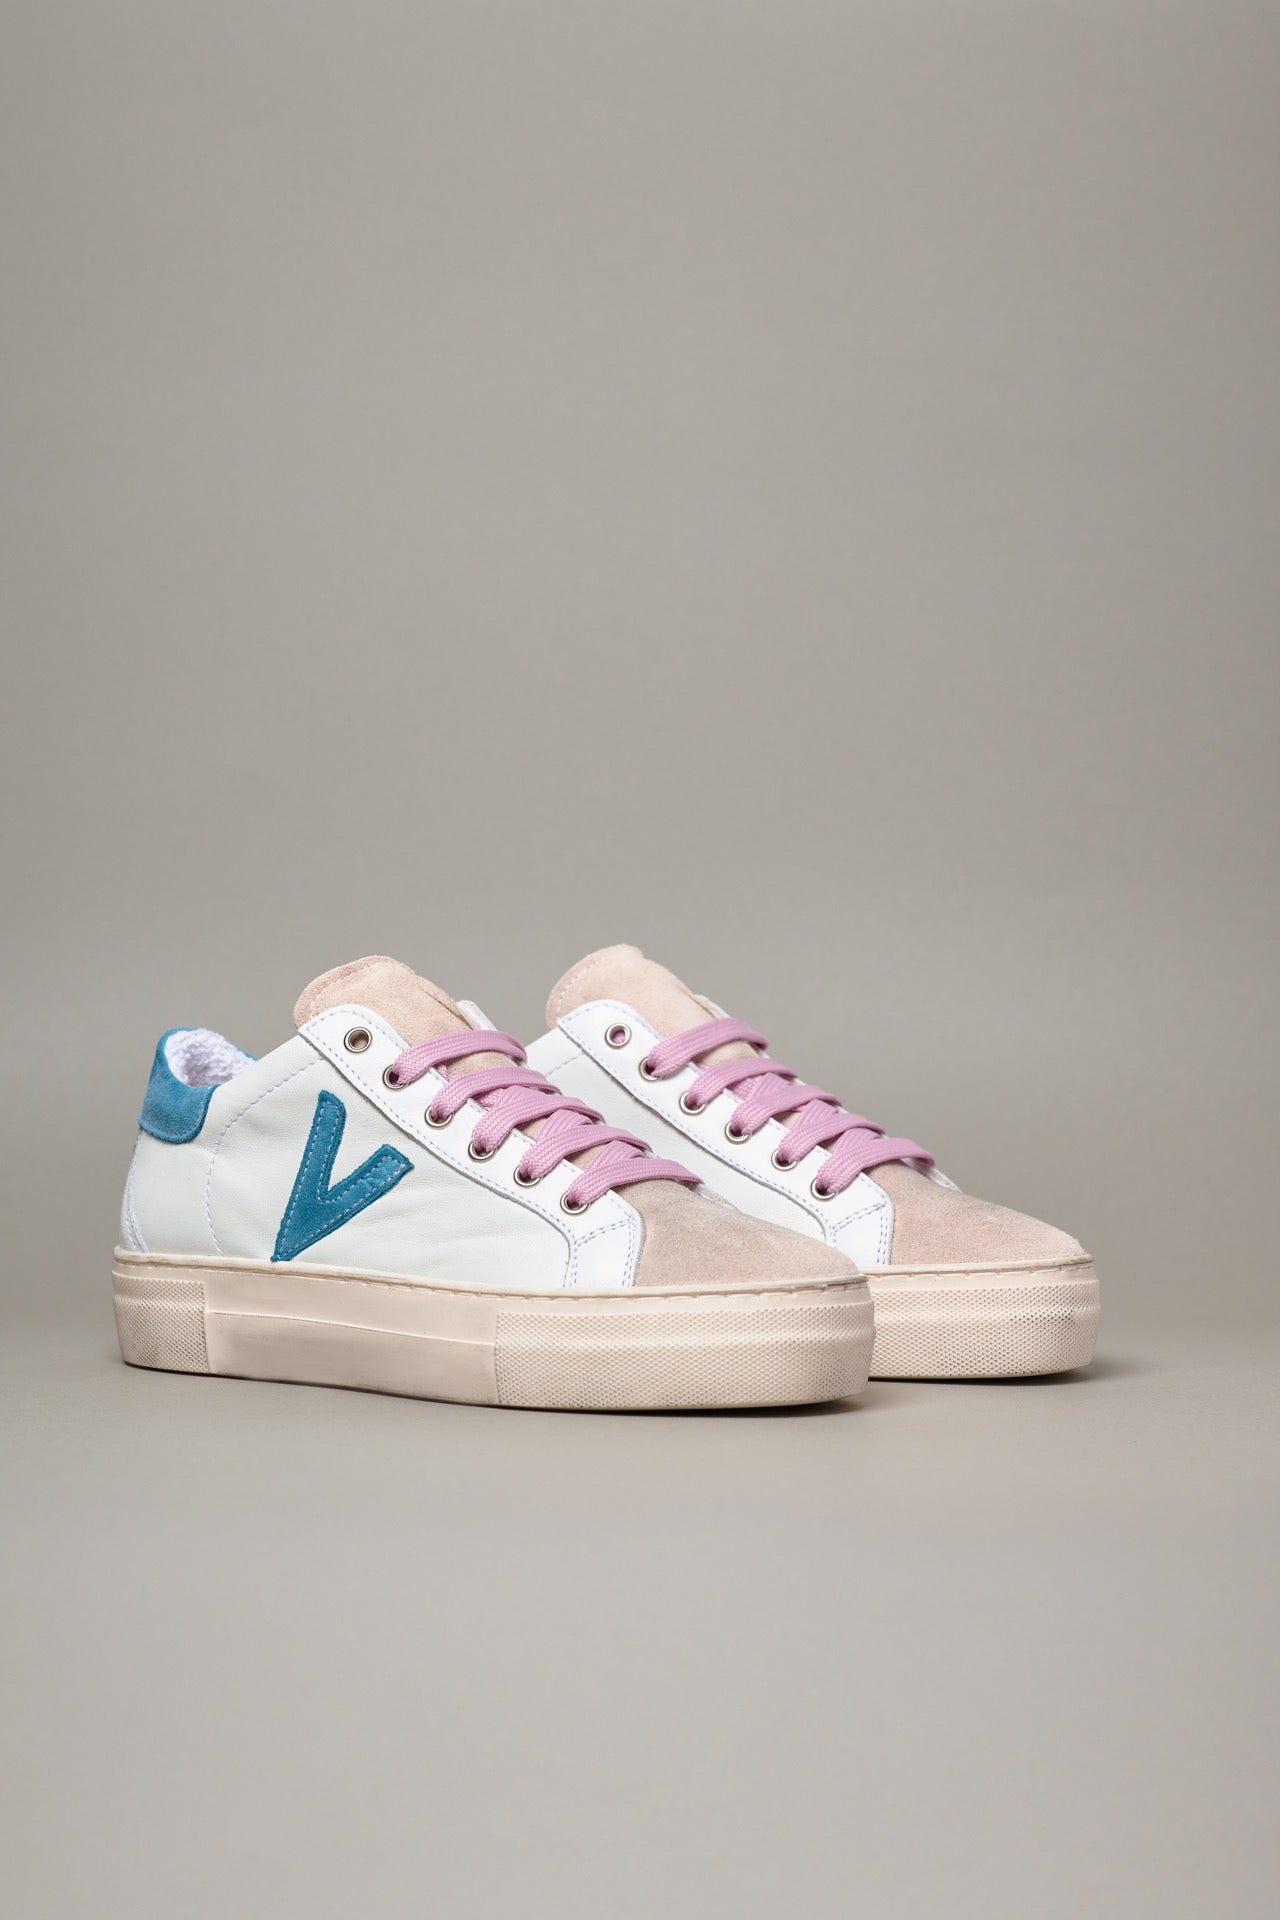 OLYMPIC - White Sneakers with Light Blue back and suede insert and Pink laces